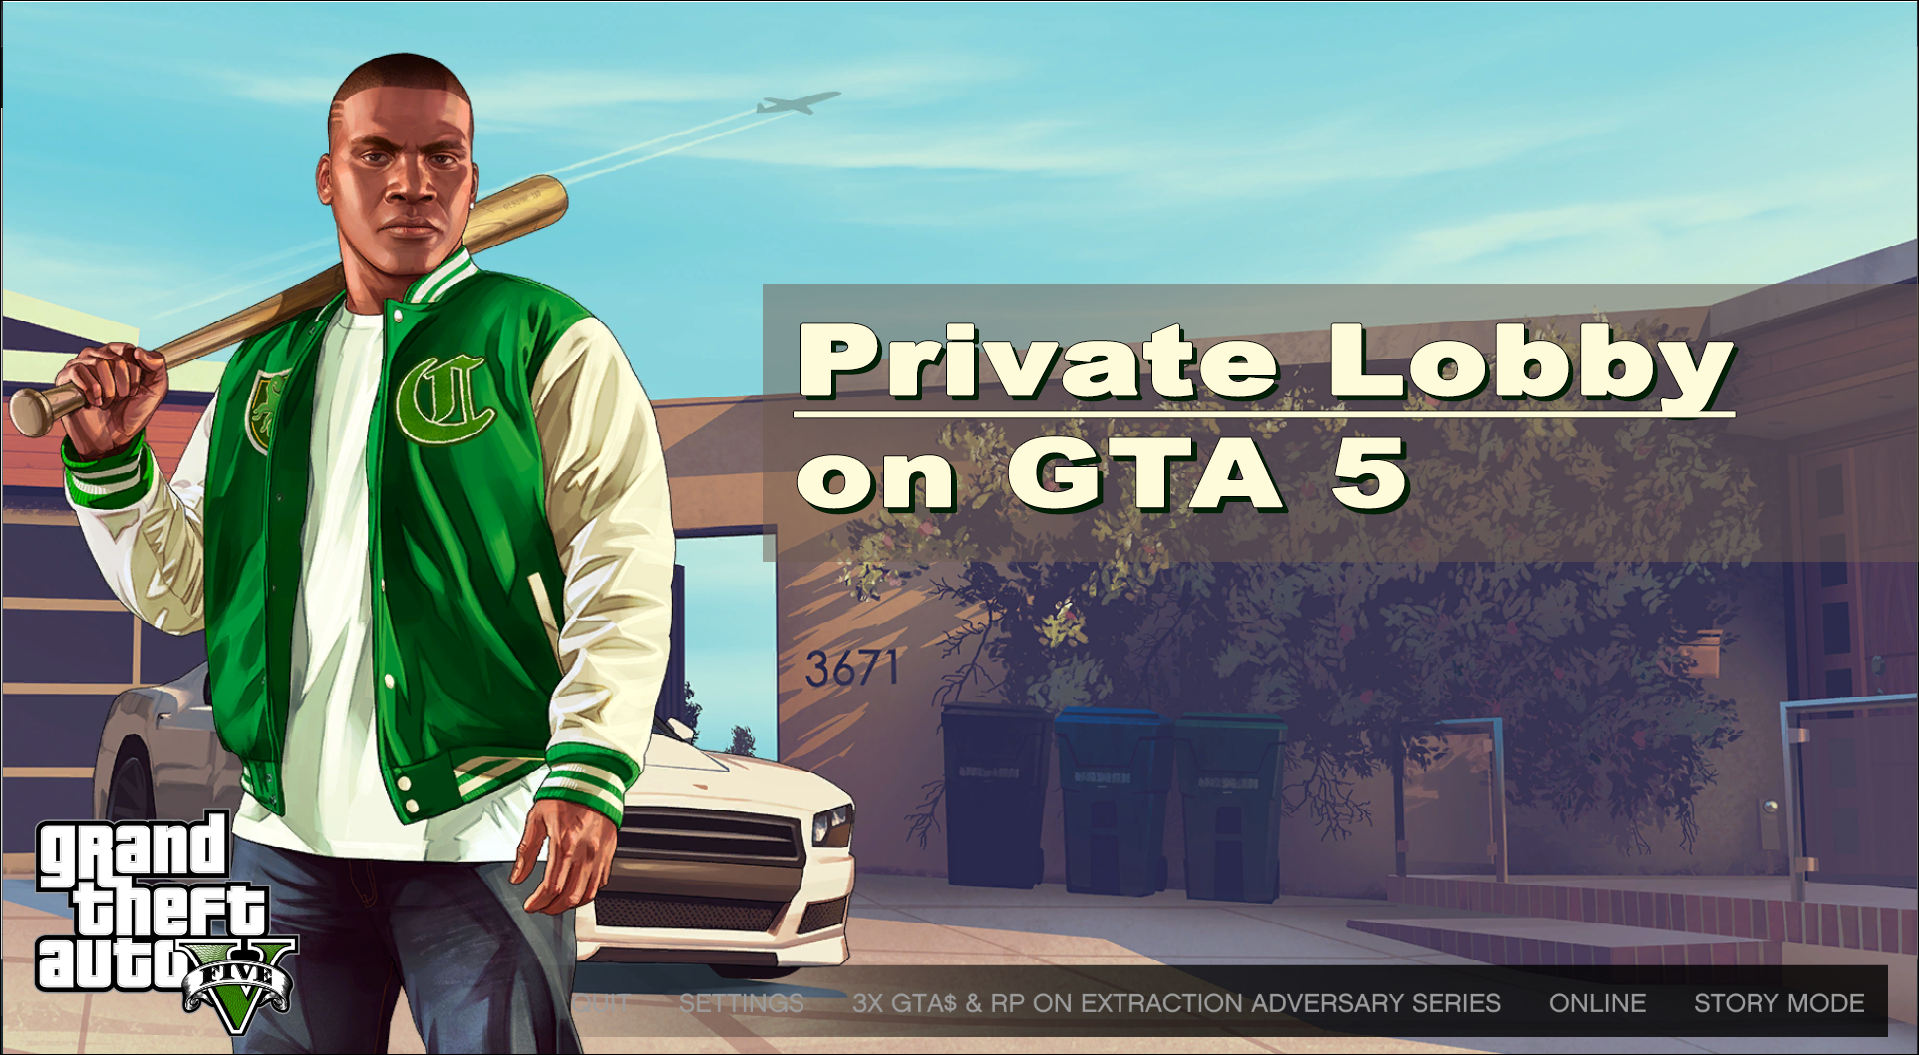 How to Make a Private Lobby on GTA 5